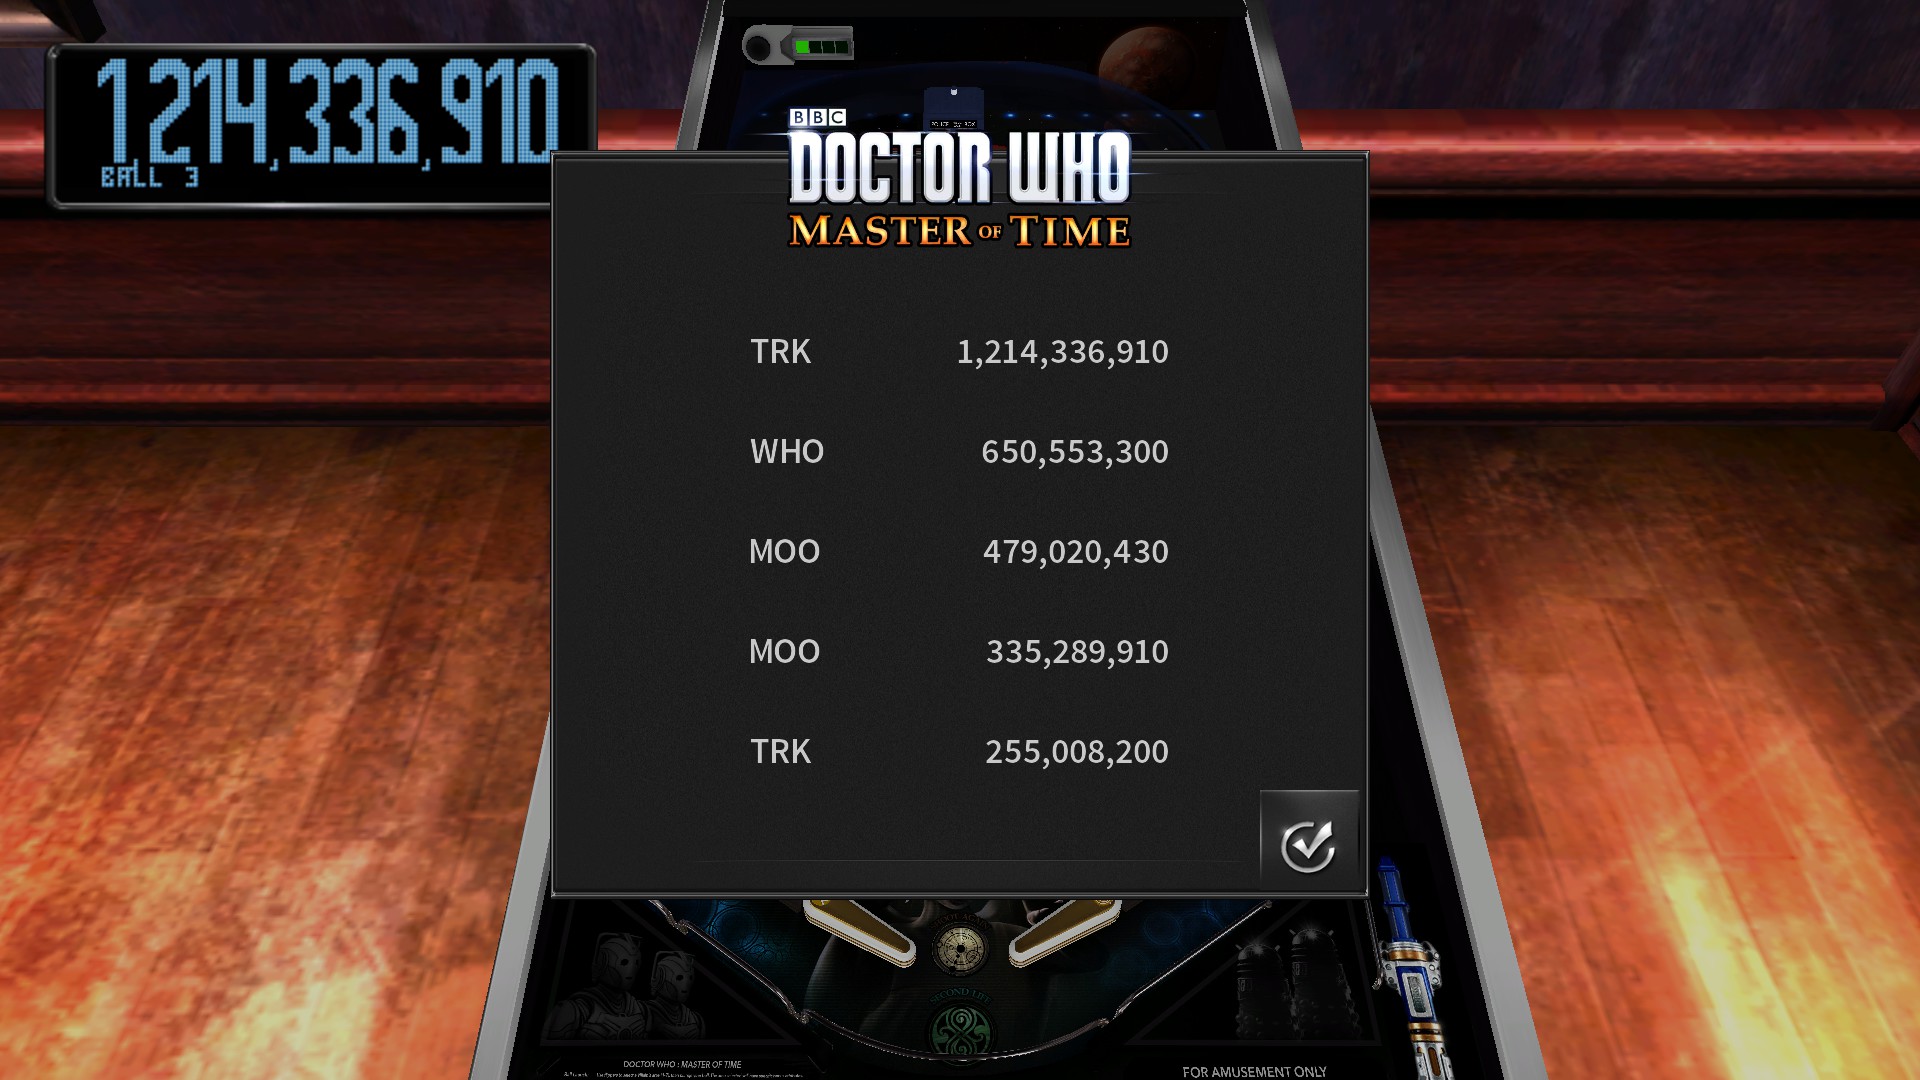 TheTrickster: Pinball Arcade: Doctor Who: Master of Time (PC) 1,214,336,910 points on 2017-03-28 13:44:57